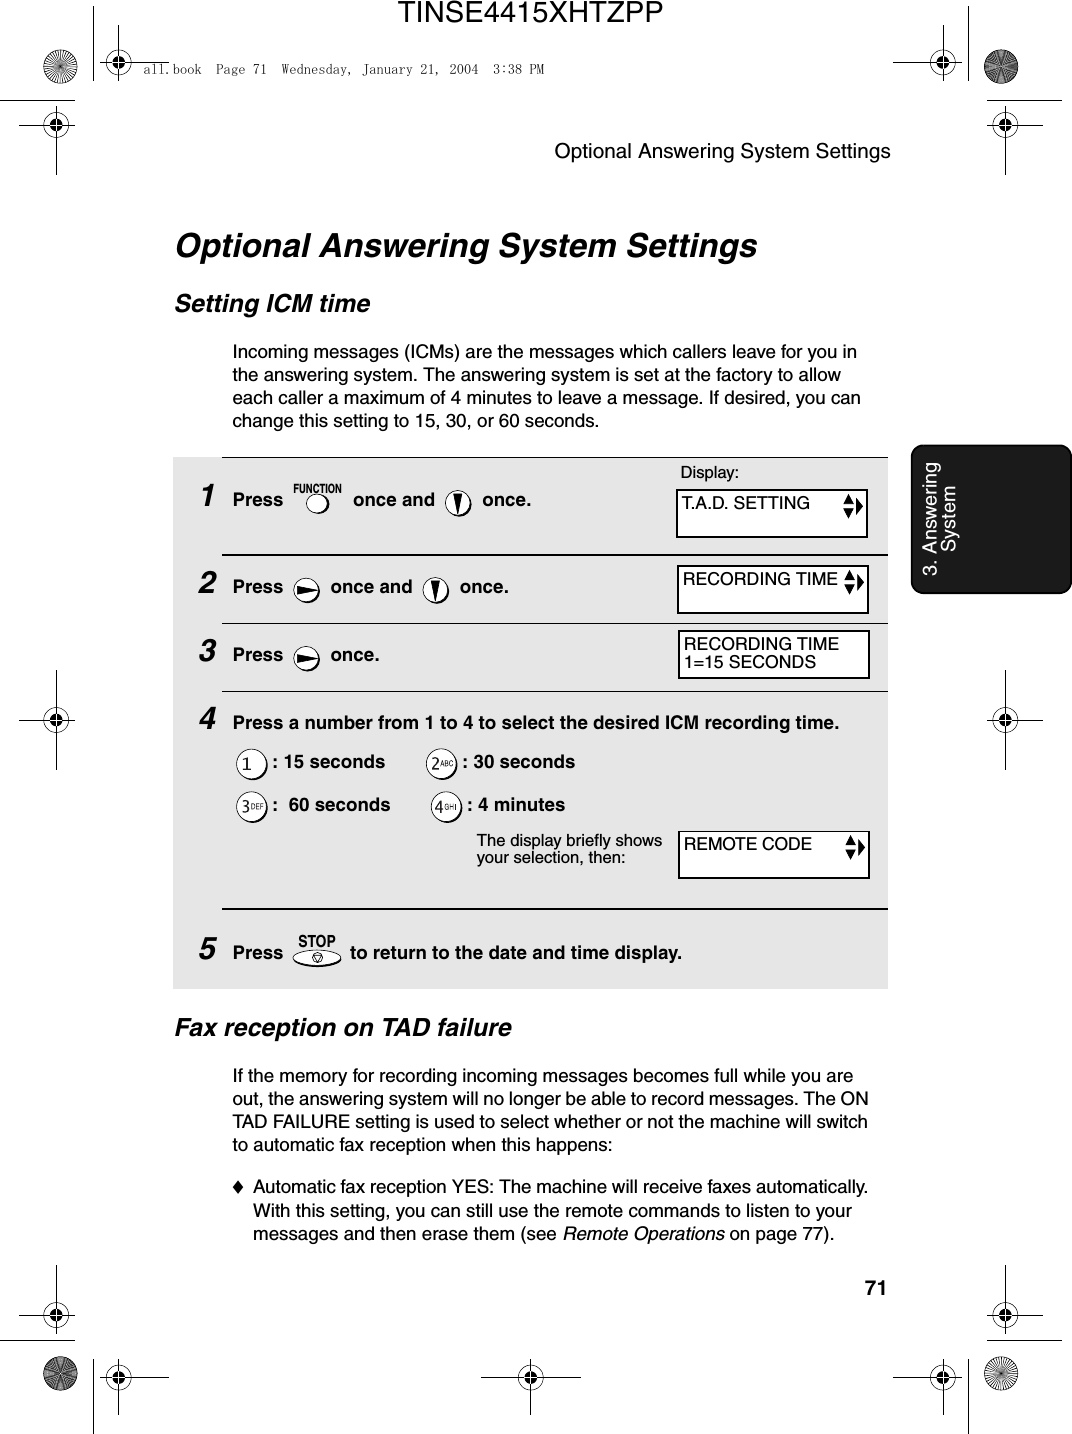 Optional Answering System Settings713. Answering System1Press   once and   once.2Press   once and   once.3Press  once.4Press a number from 1 to 4 to select the desired ICM recording time.: 15 seconds        : 30 seconds:  60 seconds        : 4 minutes5Press   to return to the date and time display.FUNCTIONSTOPOptional Answering System SettingsSetting ICM timeIncoming messages (ICMs) are the messages which callers leave for you in the answering system. The answering system is set at the factory to allow each caller a maximum of 4 minutes to leave a message. If desired, you can change this setting to 15, 30, or 60 seconds.The display briefly shows your selection, then:Fax reception on TAD failureIf the memory for recording incoming messages becomes full while you are out, the answering system will no longer be able to record messages. The ON TAD FAILURE setting is used to select whether or not the machine will switch to automatic fax reception when this happens:♦Automatic fax reception YES: The machine will receive faxes automatically. With this setting, you can still use the remote commands to listen to your messages and then erase them (see Remote Operations on page 77).Display:T.A.D. SETTINGRECORDING TIMEREMOTE CODERECORDING TIME1=15 SECONDSall.book  Page 71  Wednesday, January 21, 2004  3:38 PMTINSE4415XHTZPP